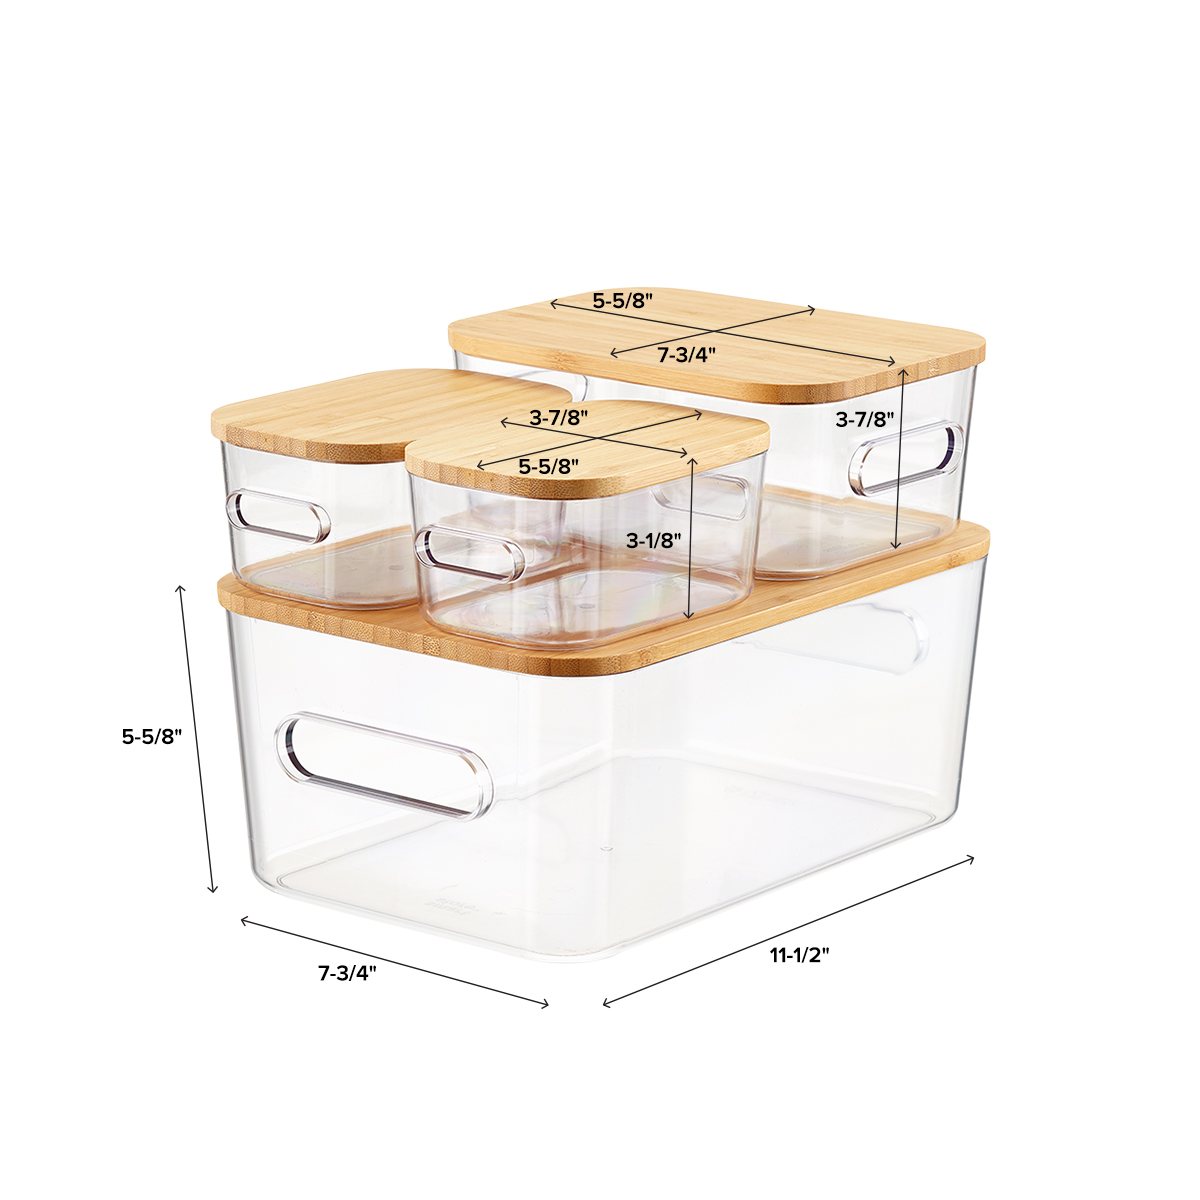 https://www.containerstore.com/catalogimages/449275/10077435-compact-plastic-bins-4pack-.jpg